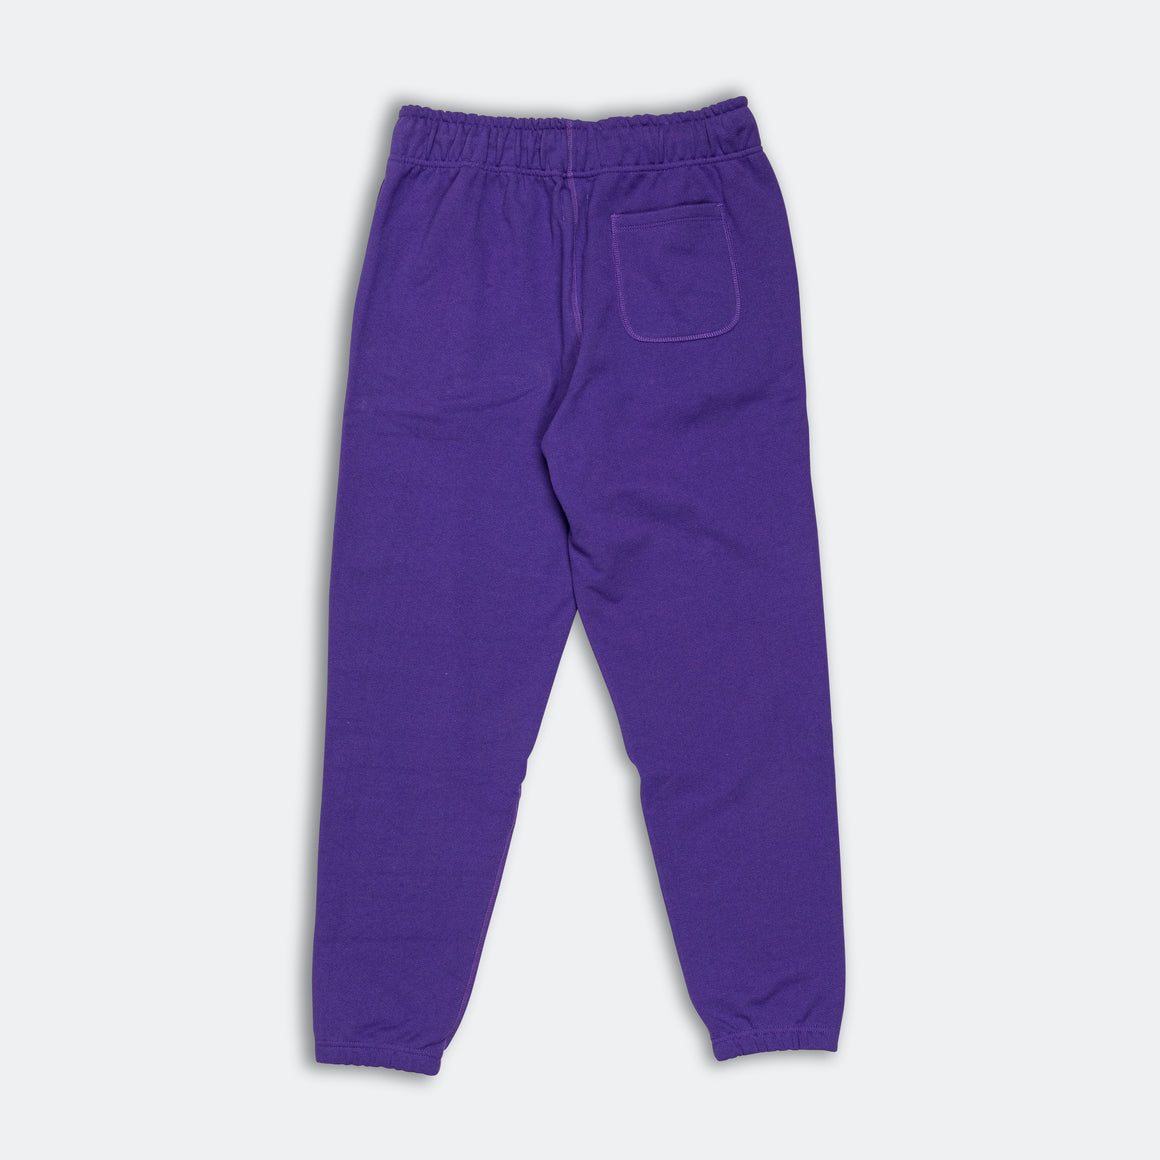 New Balance - MADE in USA Sweatpant - Prism Purple - UP THERE